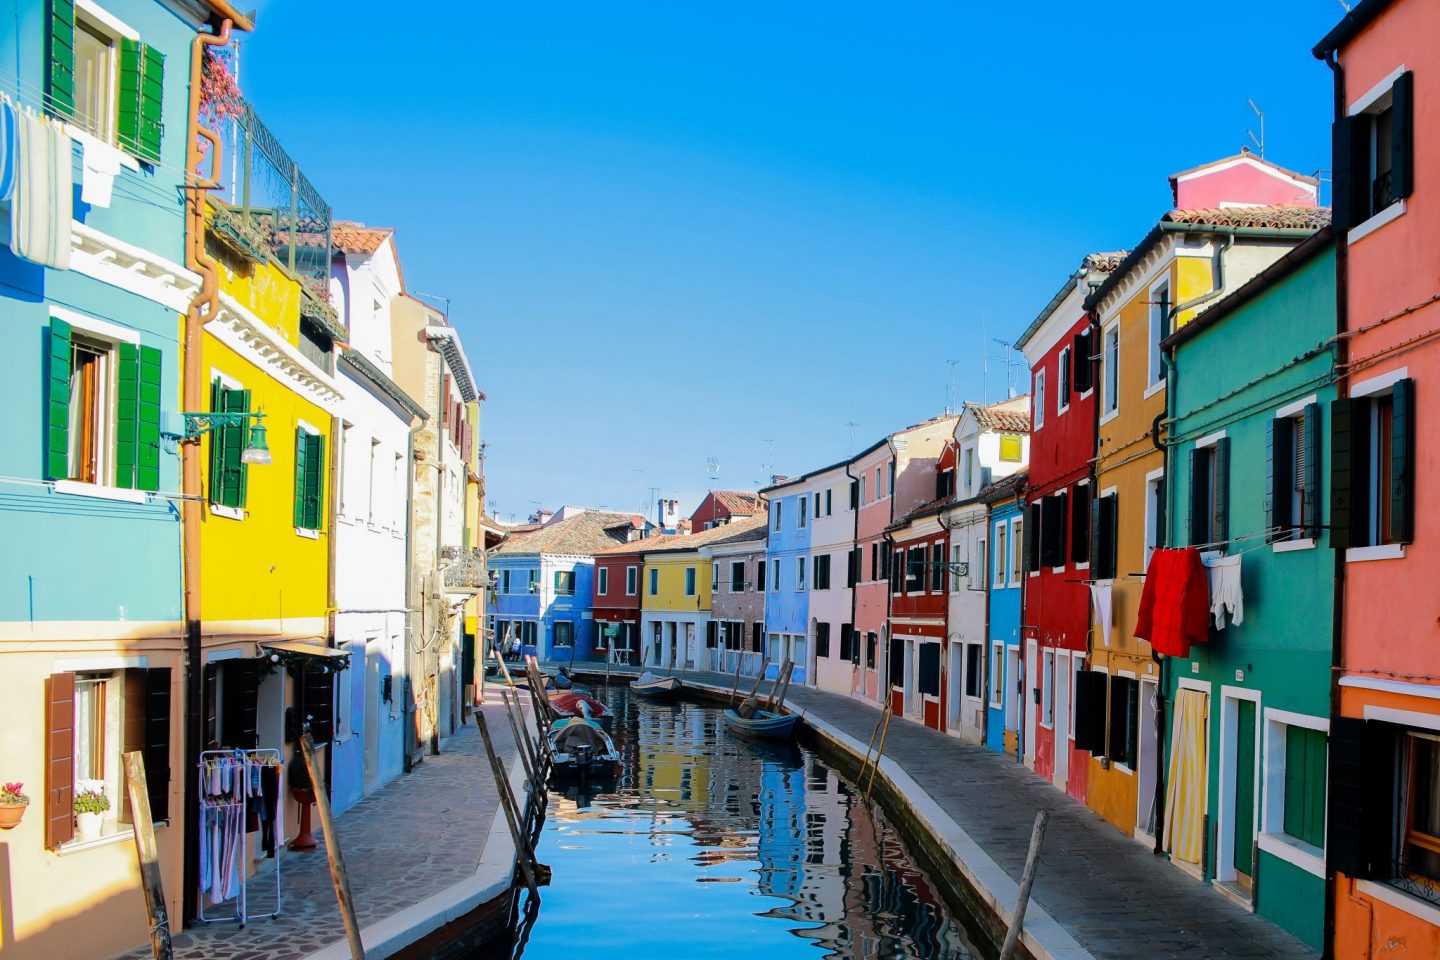 Burano, Venice, Italy is one of the world's most colourful cities